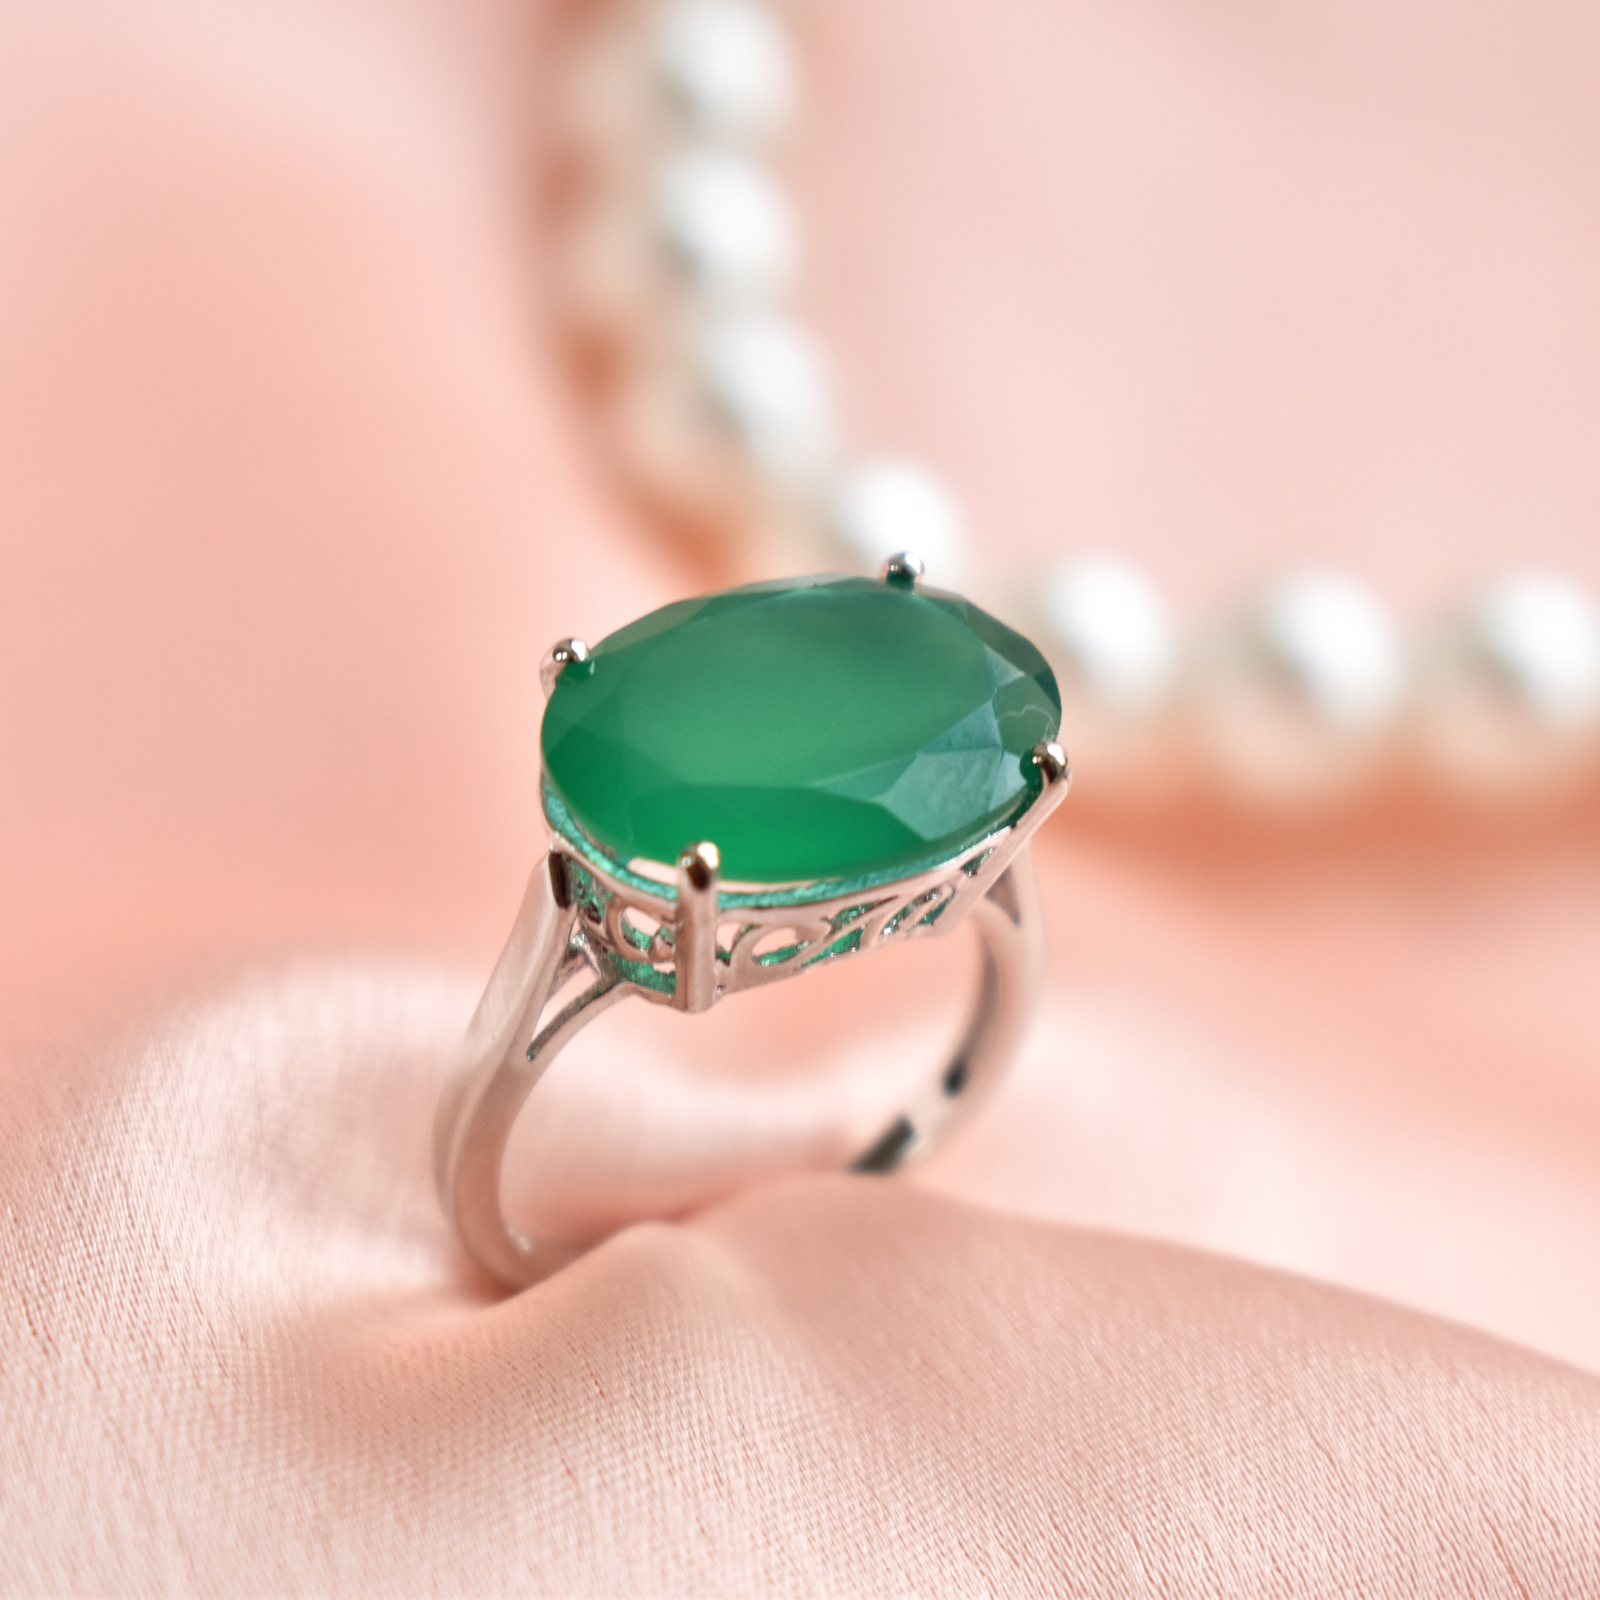 Primary image for Green Onyx Ring | 925 Sterling Silver Ring | Statement Ring | Cocktail Ring |